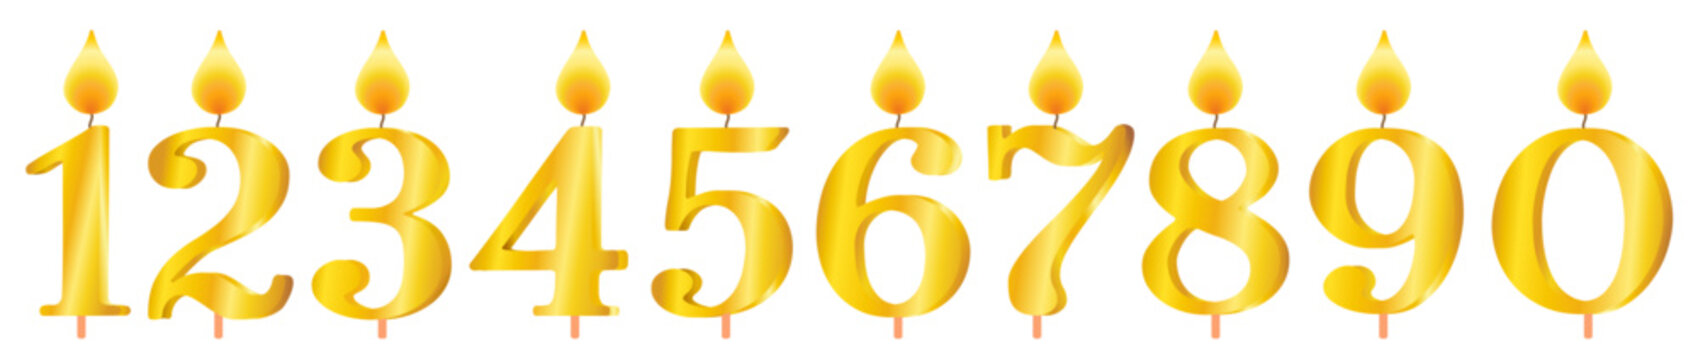 Set of golden burning candles numbers for cake decoration for birthday, anniversary, celebration, new year, christmas on a white background, vector